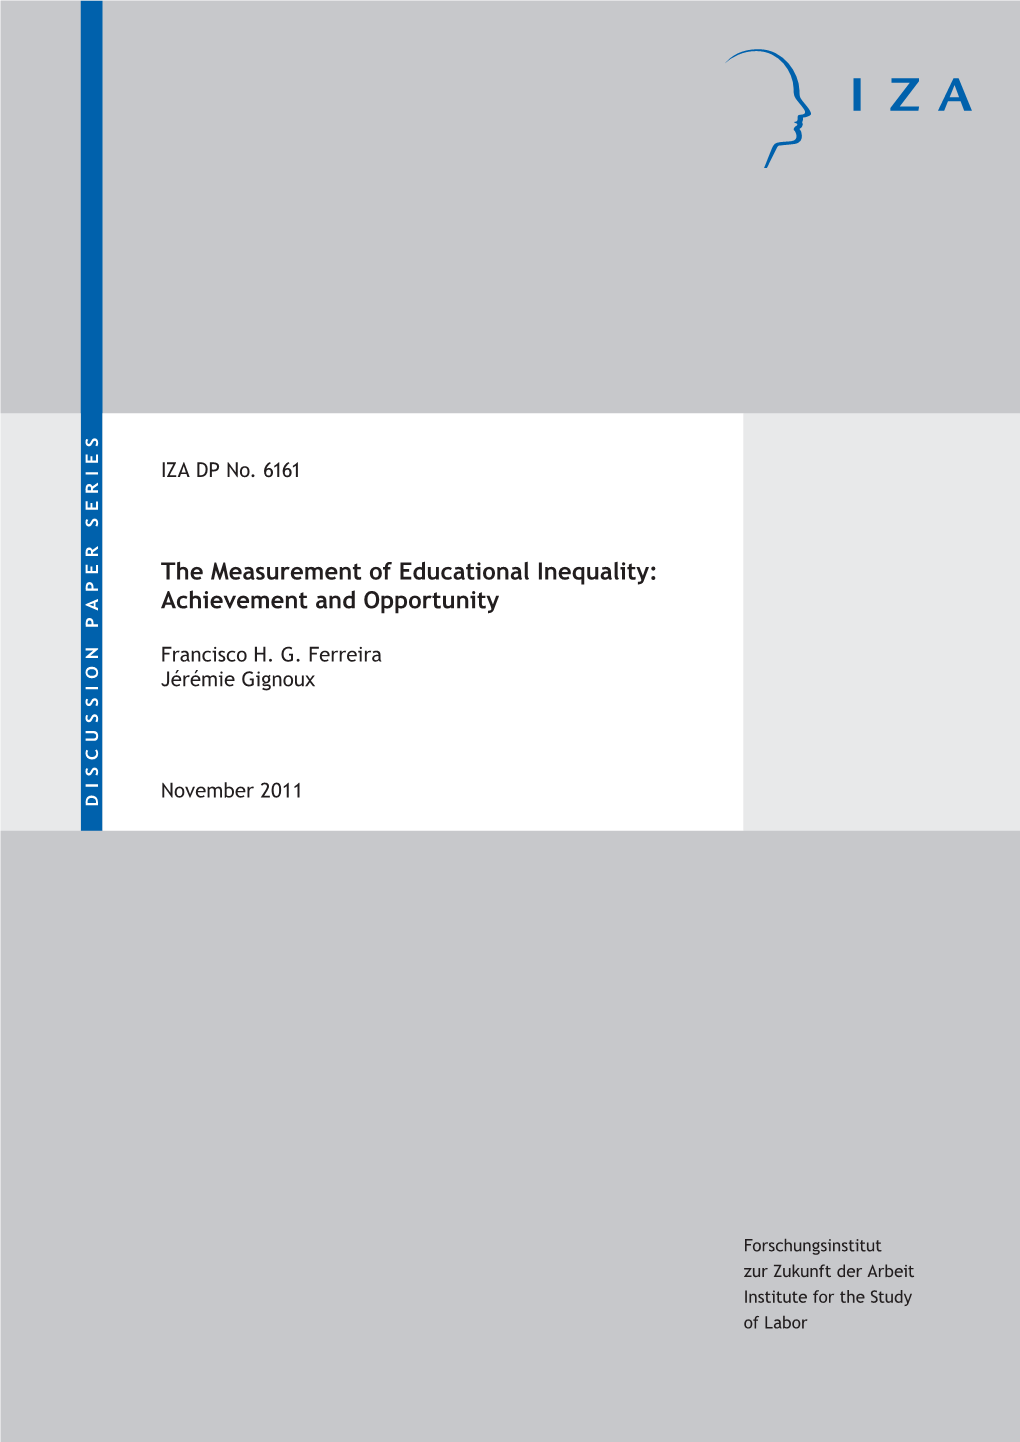 The Measurement of Educational Inequality: Achievement and Opportunity